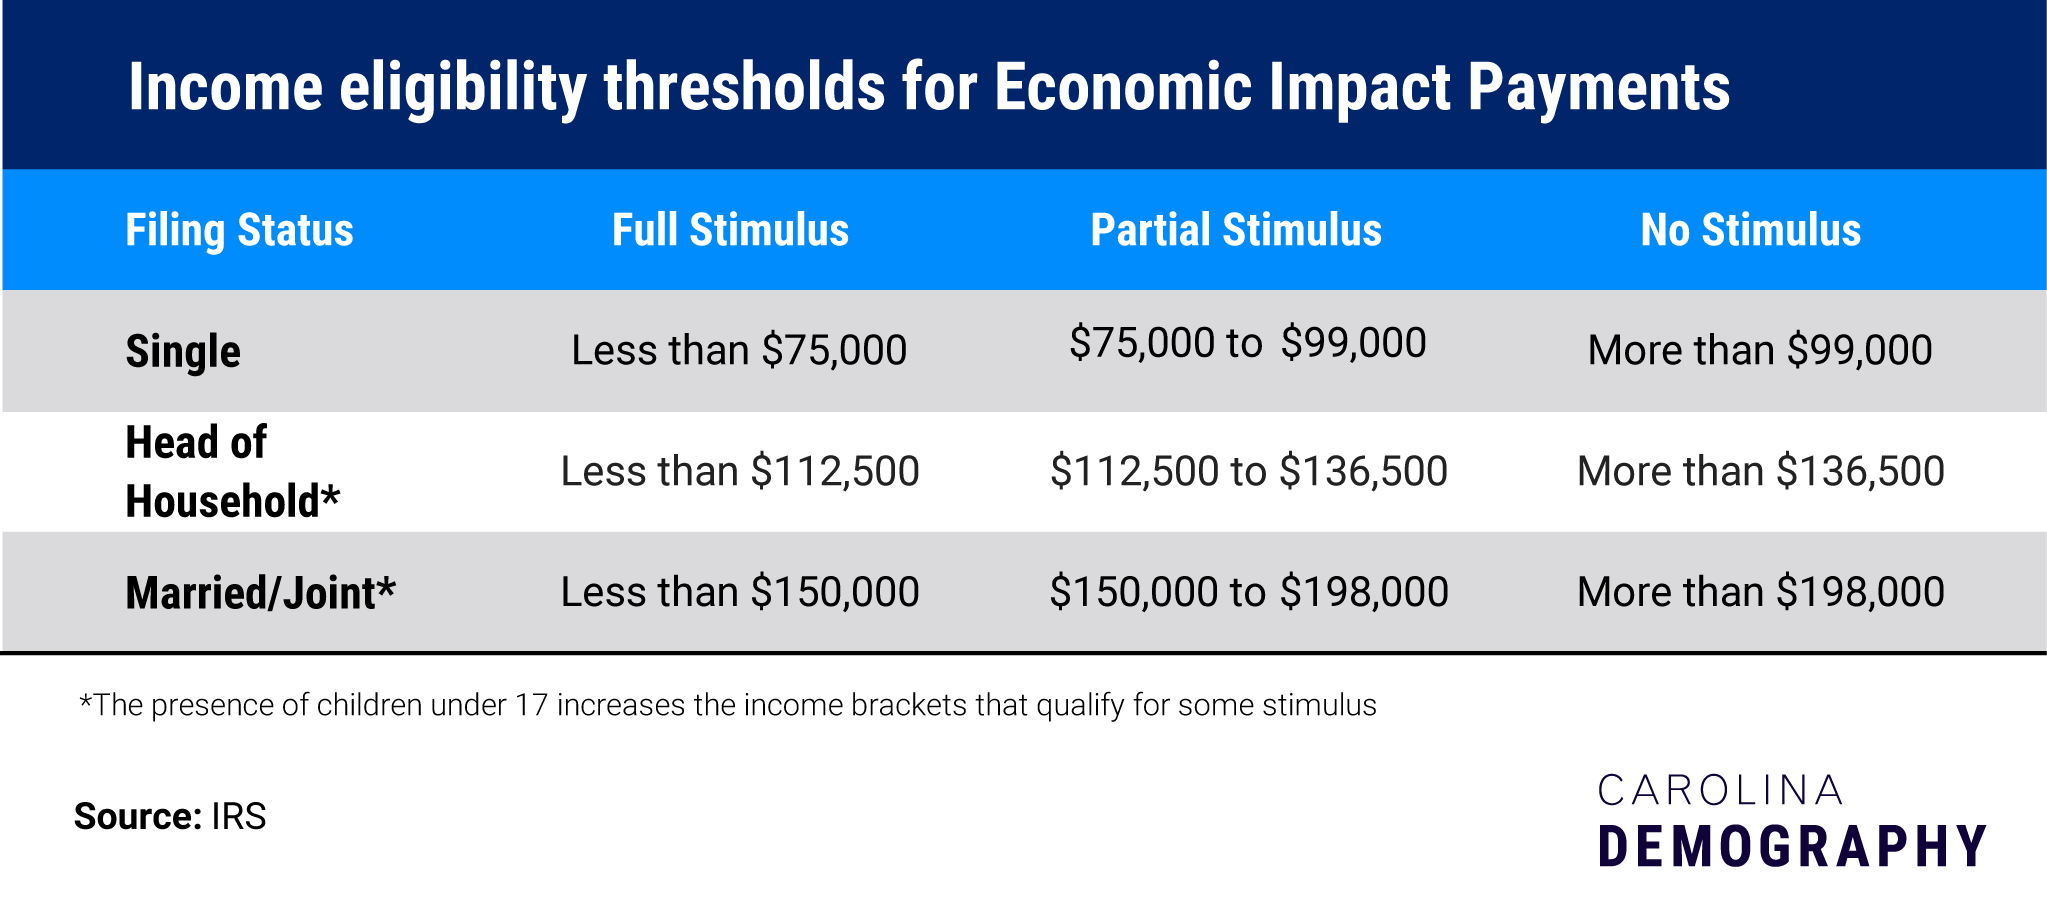 Table Title: Income eligibility thresholds for Economic Impact Payments Filing Status Full Stimulus Partial Stimulus No Stimulus Single Less than $75,000 $75,000 to $99,000 More than $99,000 Head of Household* Less than $112,500 $112,500 to $136,500 More than $136,500 Married/Joint* Less than $150,000 $150,000 to $198,000 More than $198,000 *The presence of children under 17 increases the income brackets that qualify for some stimulus